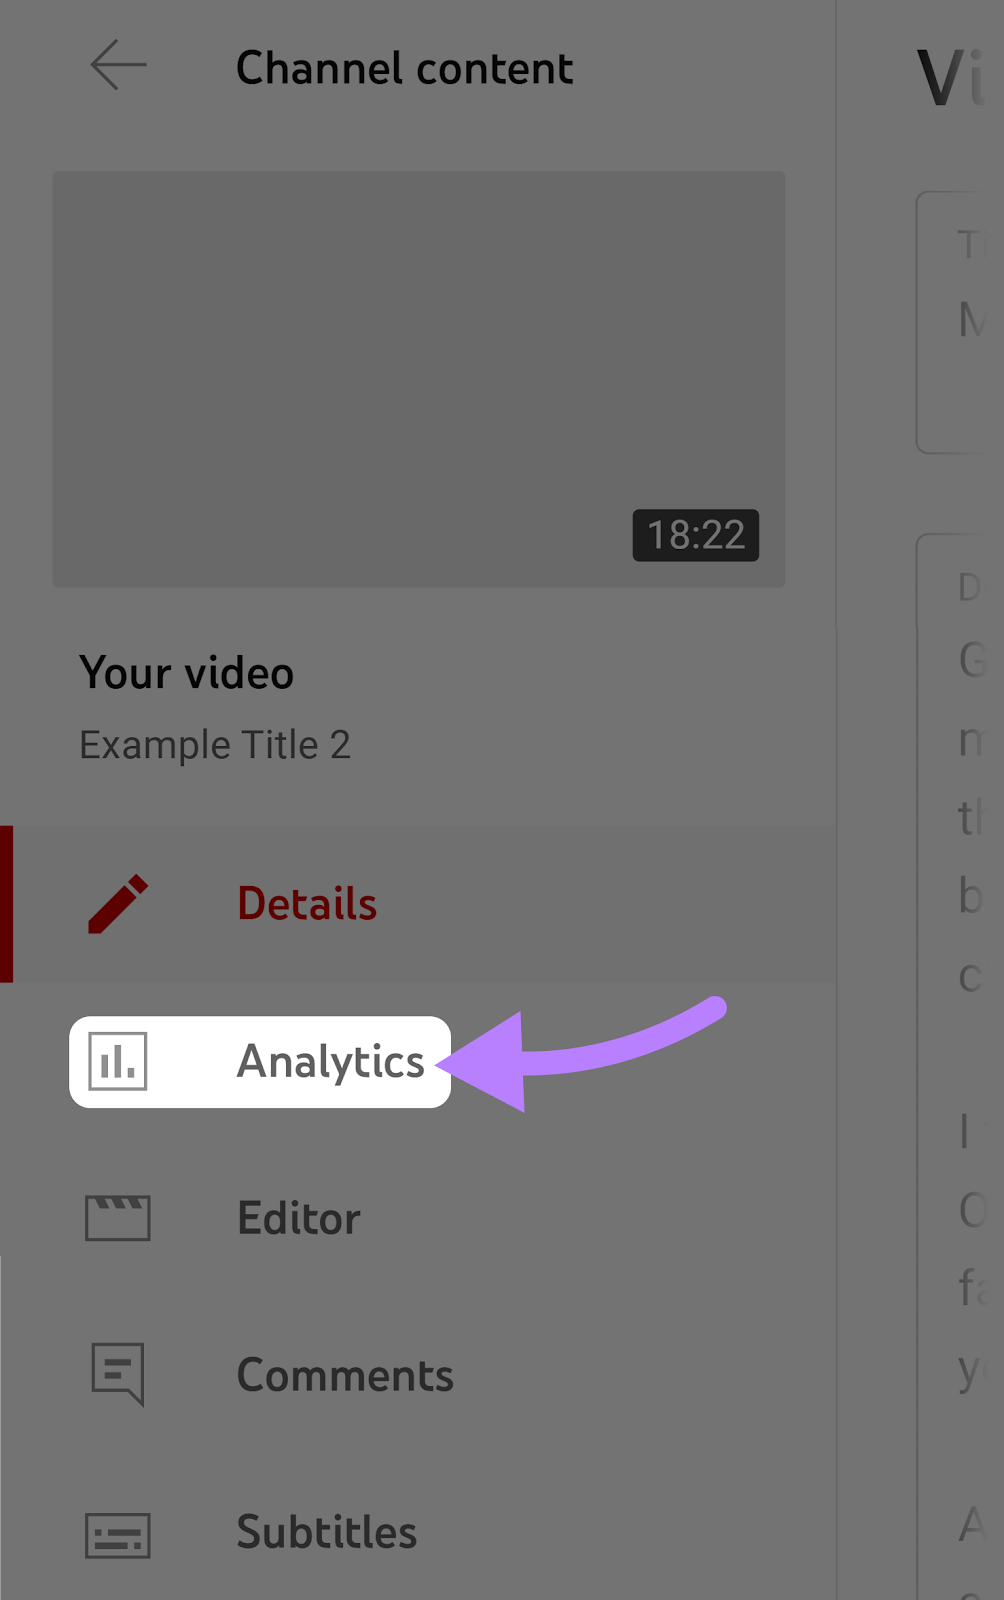 "Analytics" option selected for the c،sen video